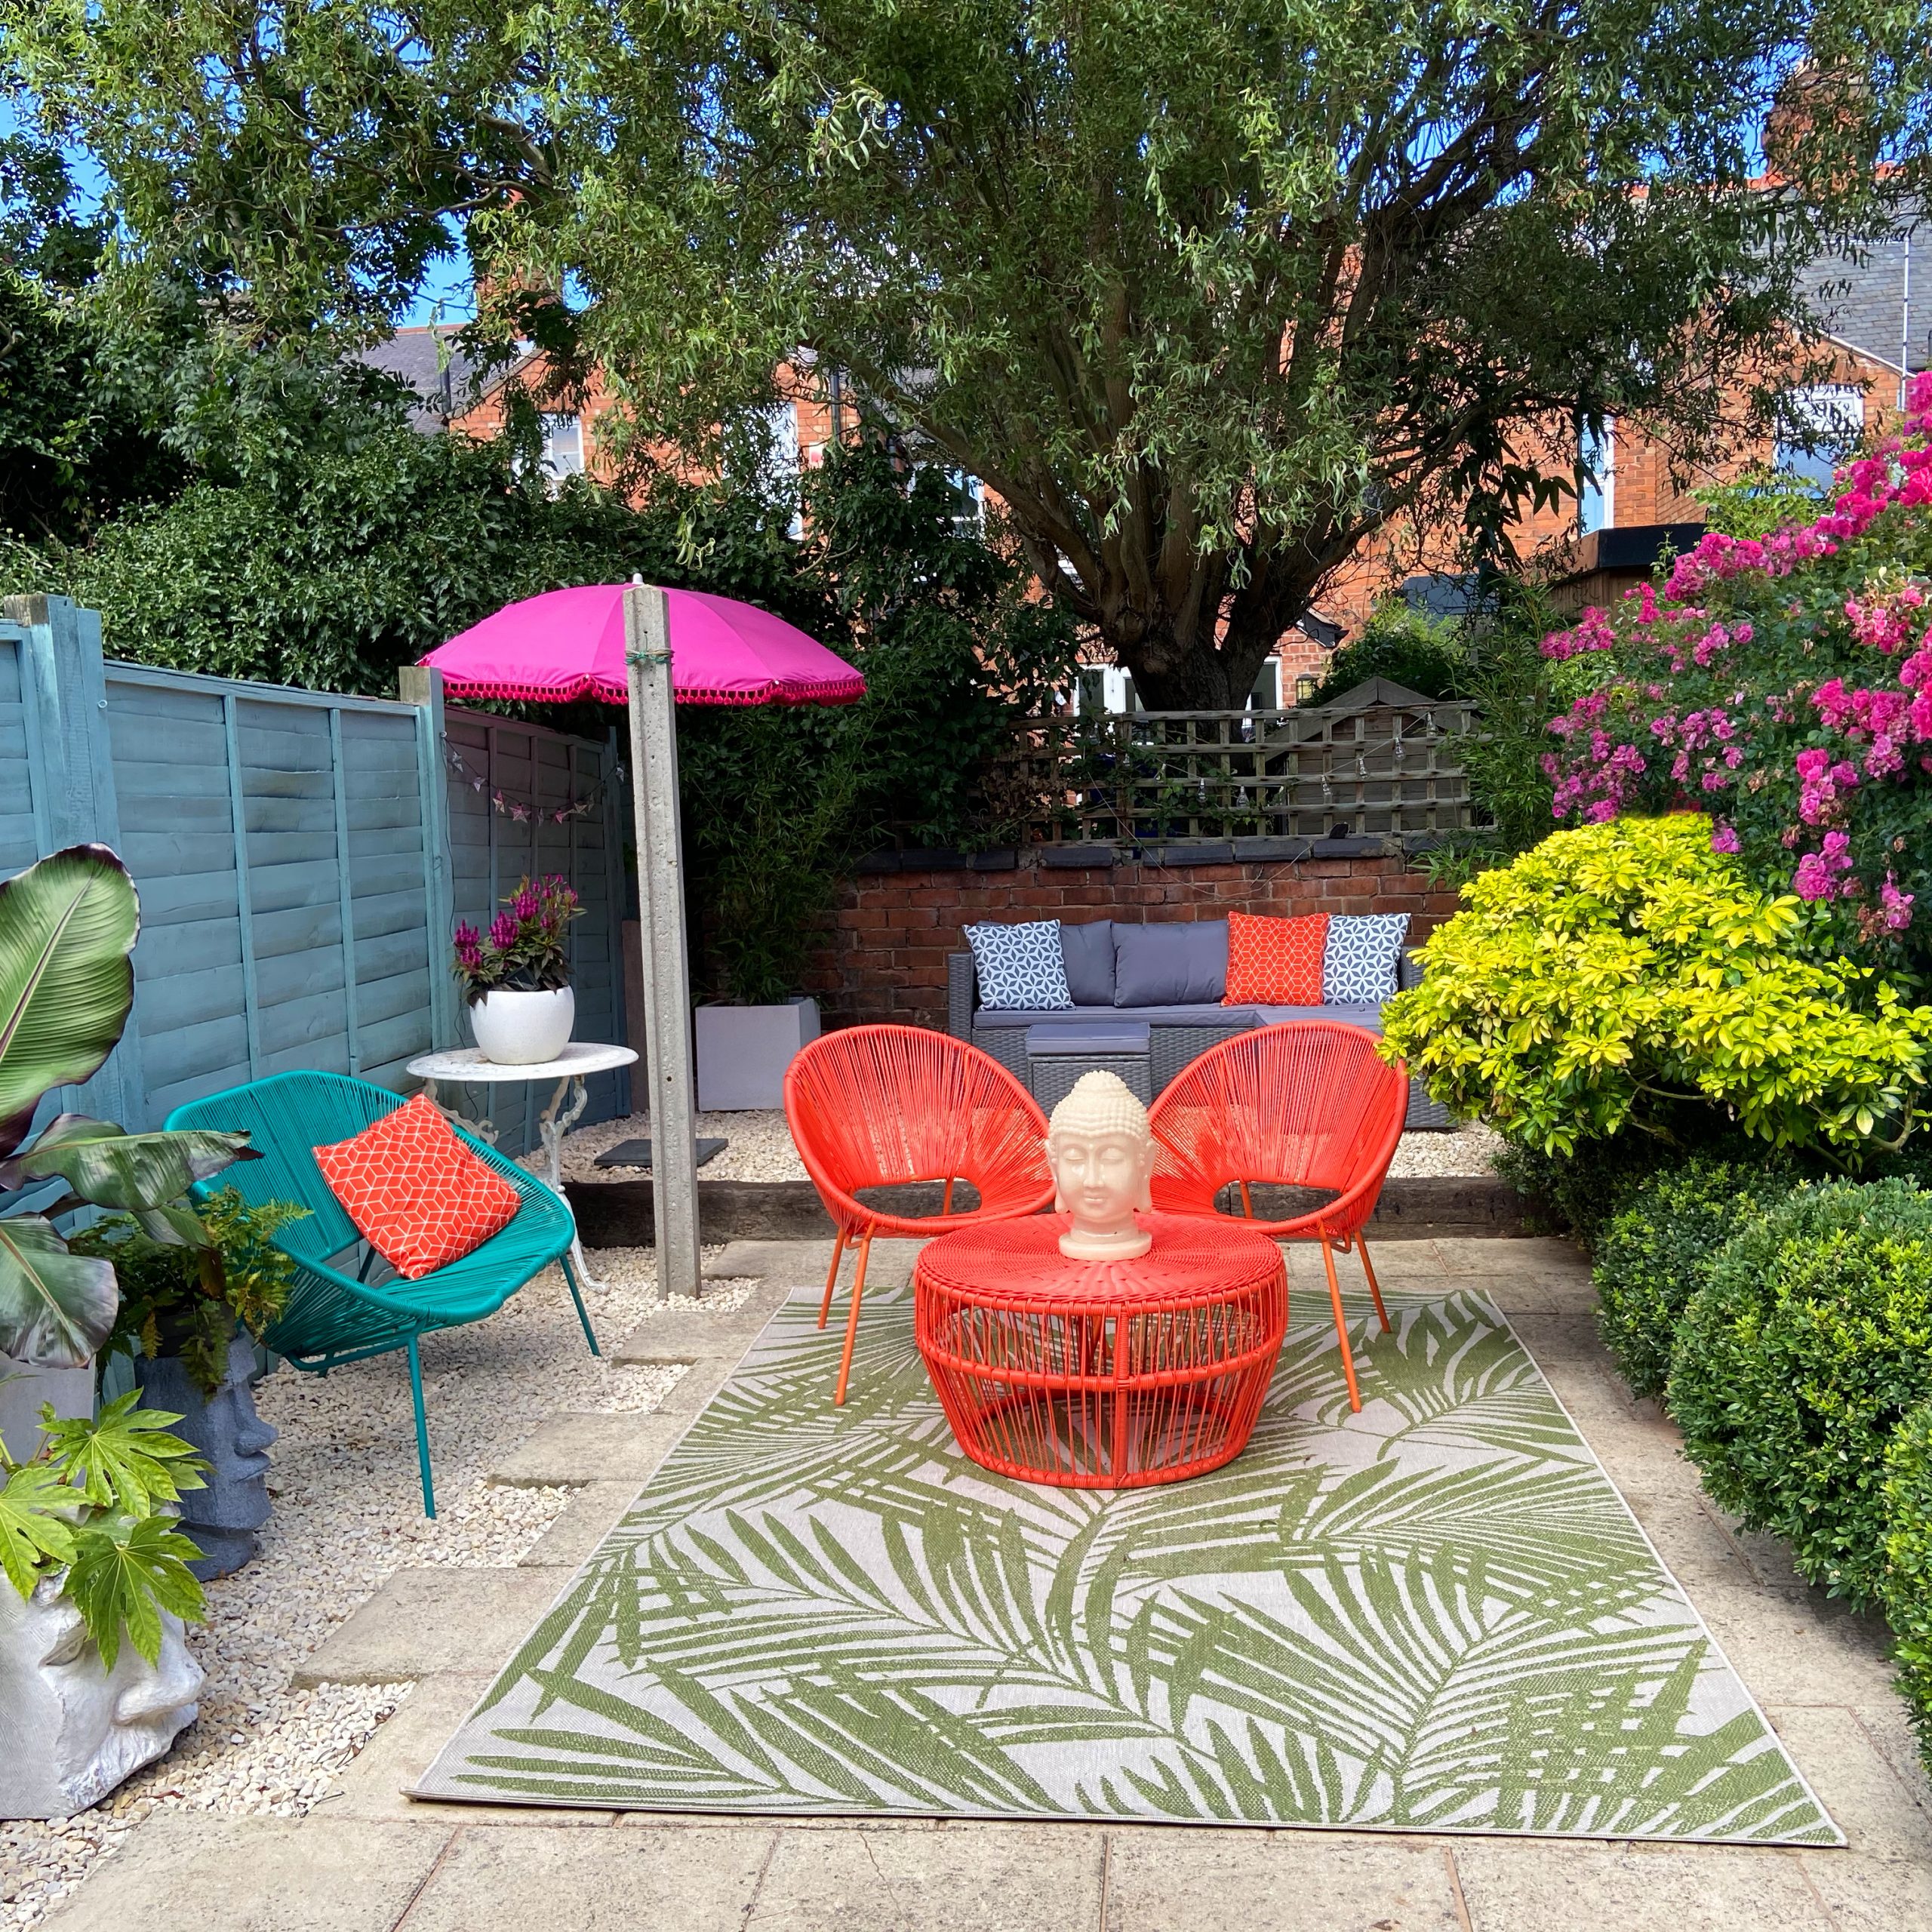 DIY gravel patio to create the feel of a Mediterranean courtyard, with colourful garden furniture and outdoor rug